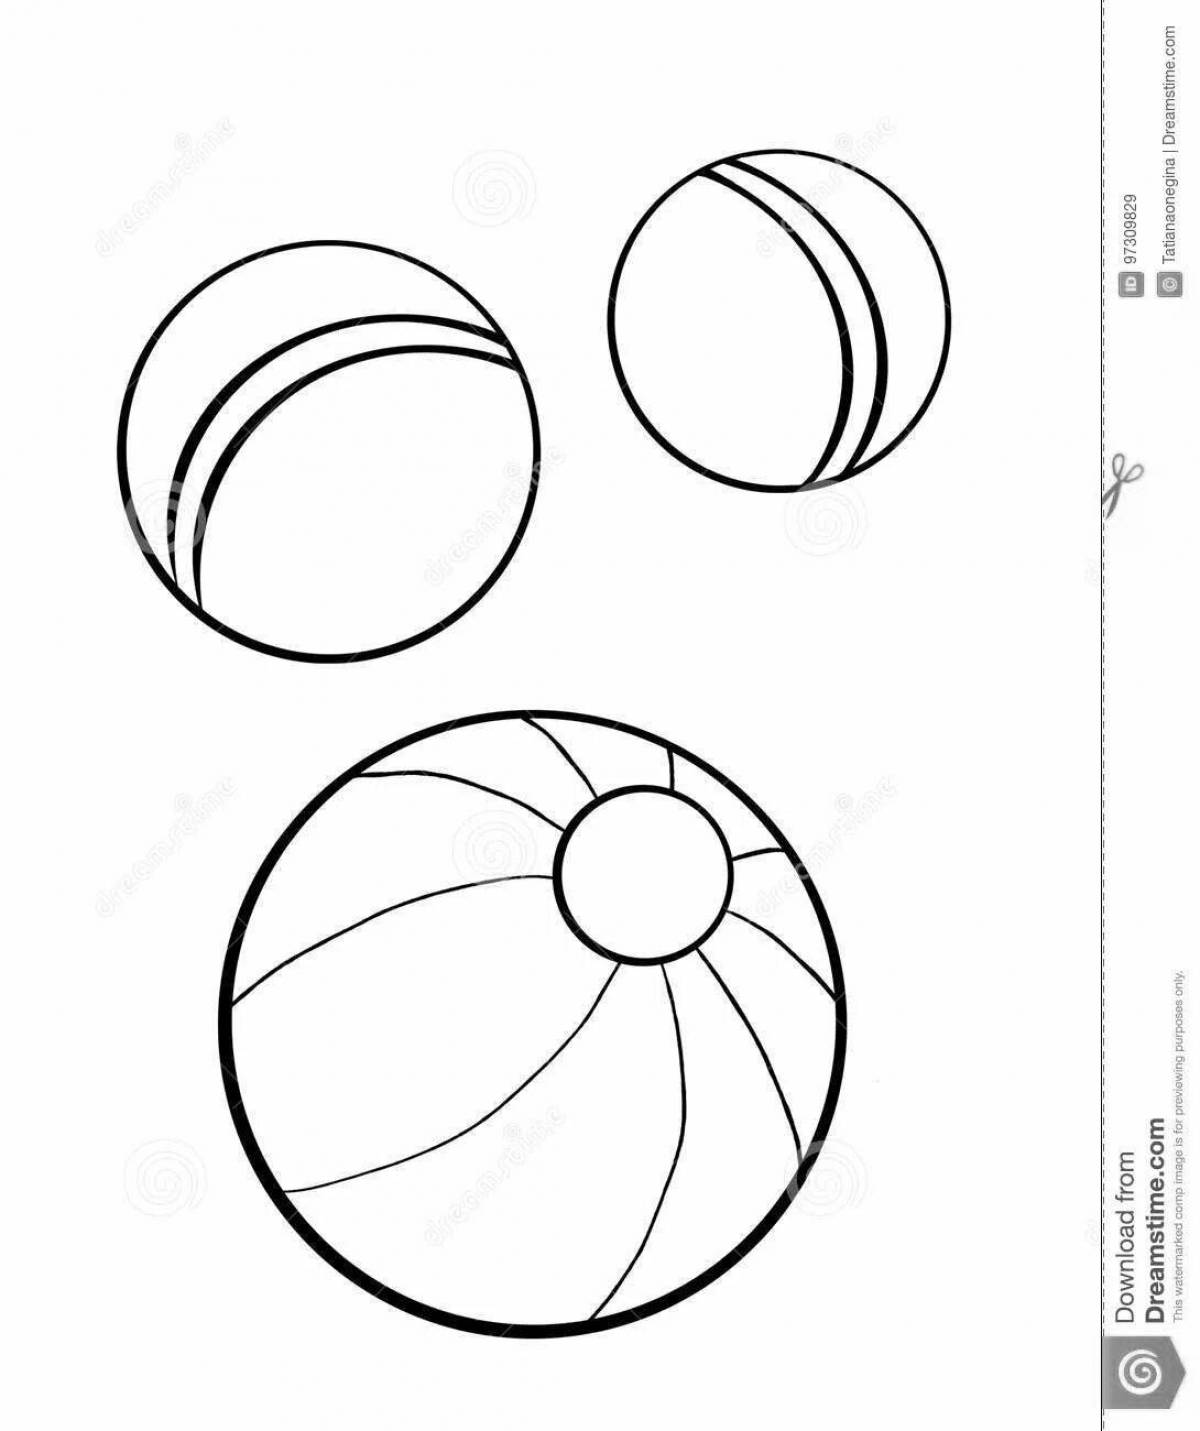 Amazing large and small coloring pages for 3-4 year olds